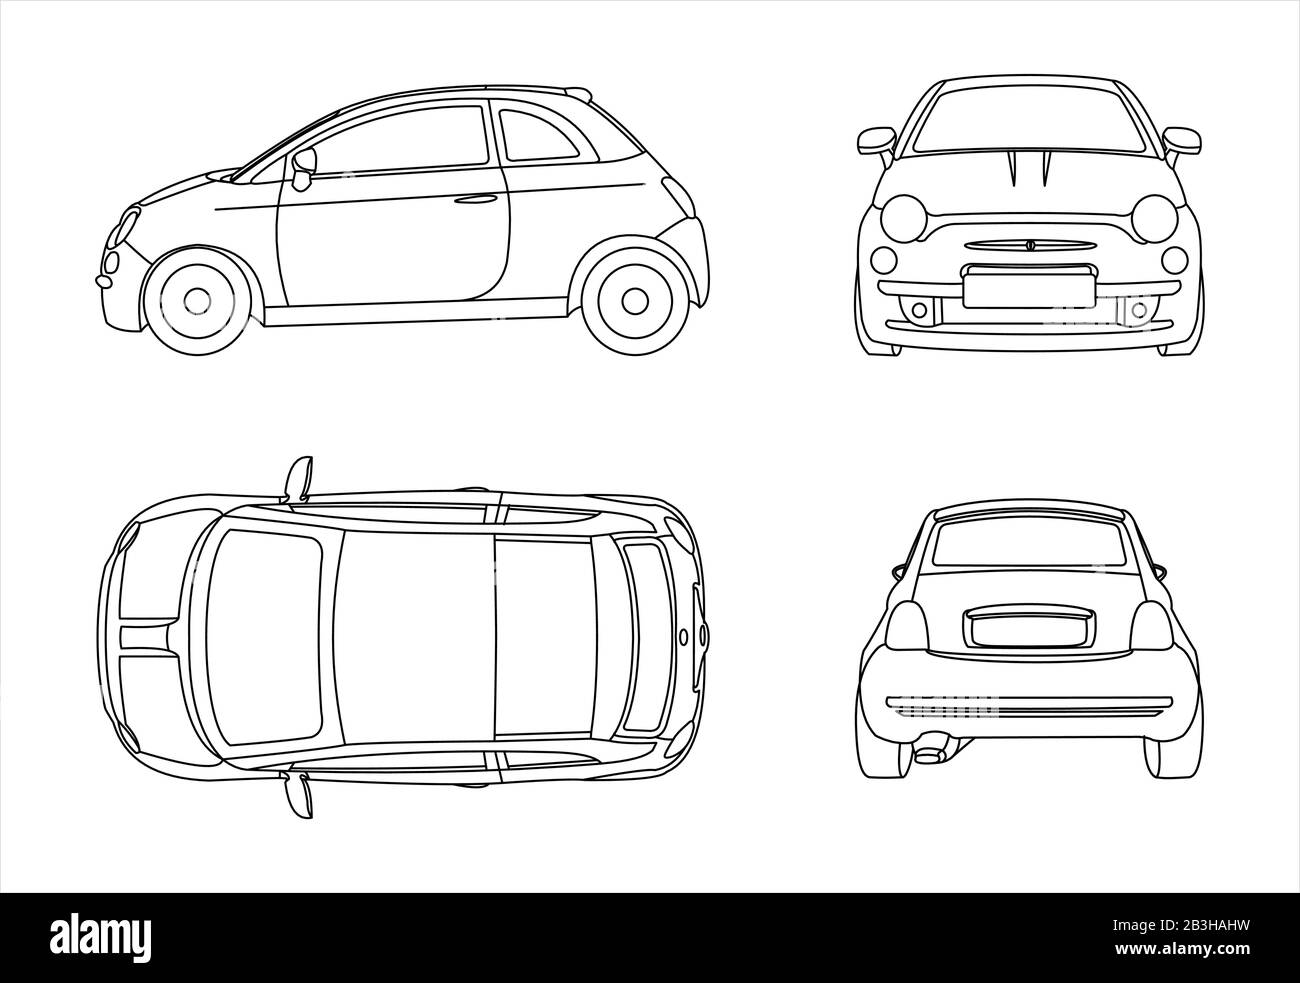 Outline vector car isolated on white background, side view; front view; back view; view from above. Modern flat illustration. Stock Vector